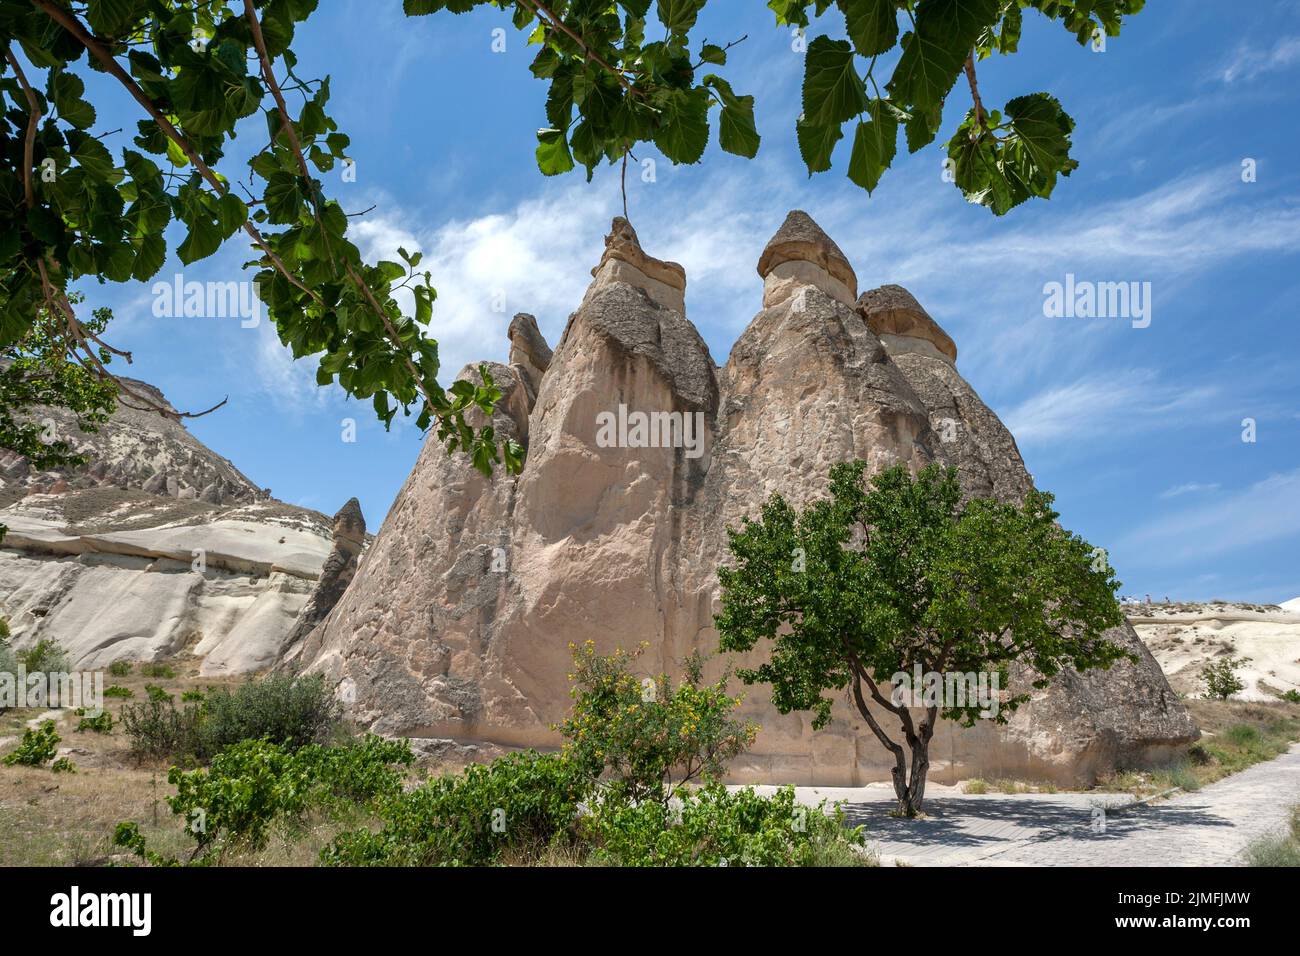 The unique volcanic landscape at Pasabagi near Zelve in the Cappadocia region of Turkey which features rock formations Stock Photo